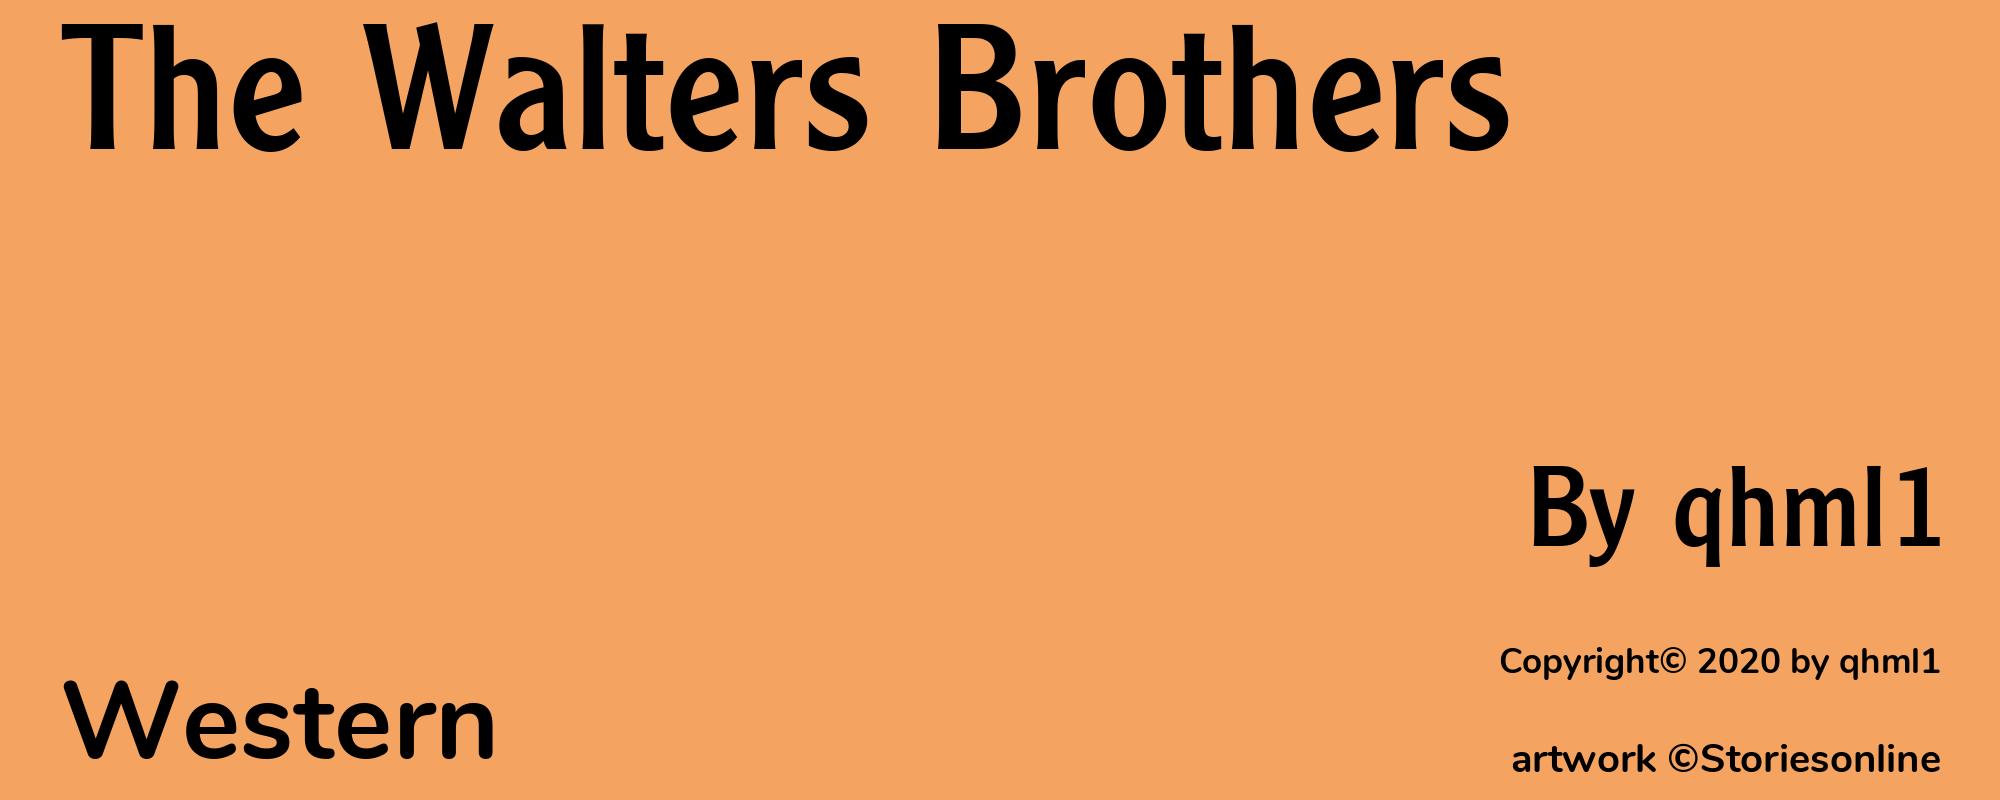 The Walters Brothers - Cover